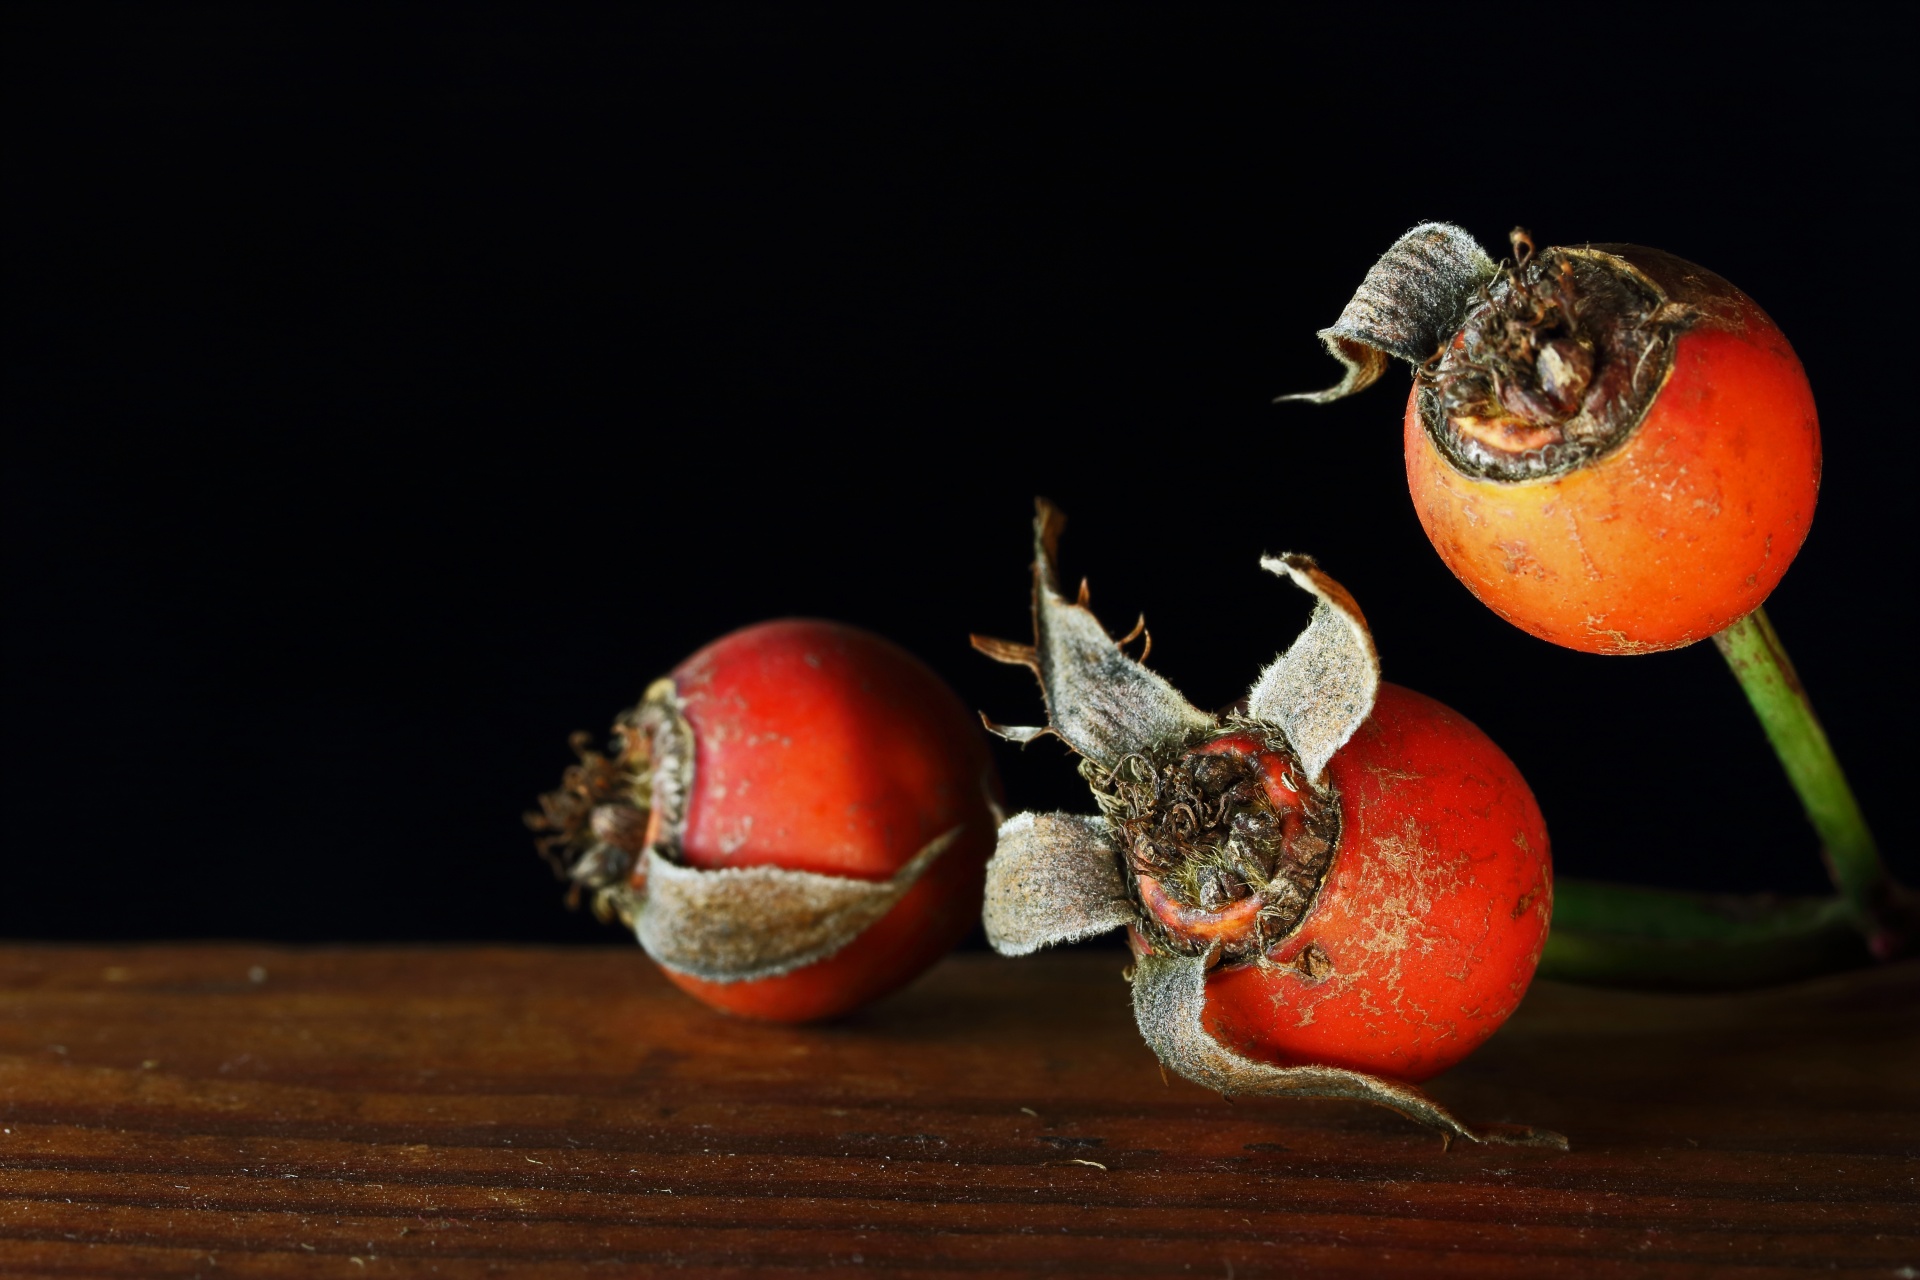 Common Rose Apples On Wooden Board